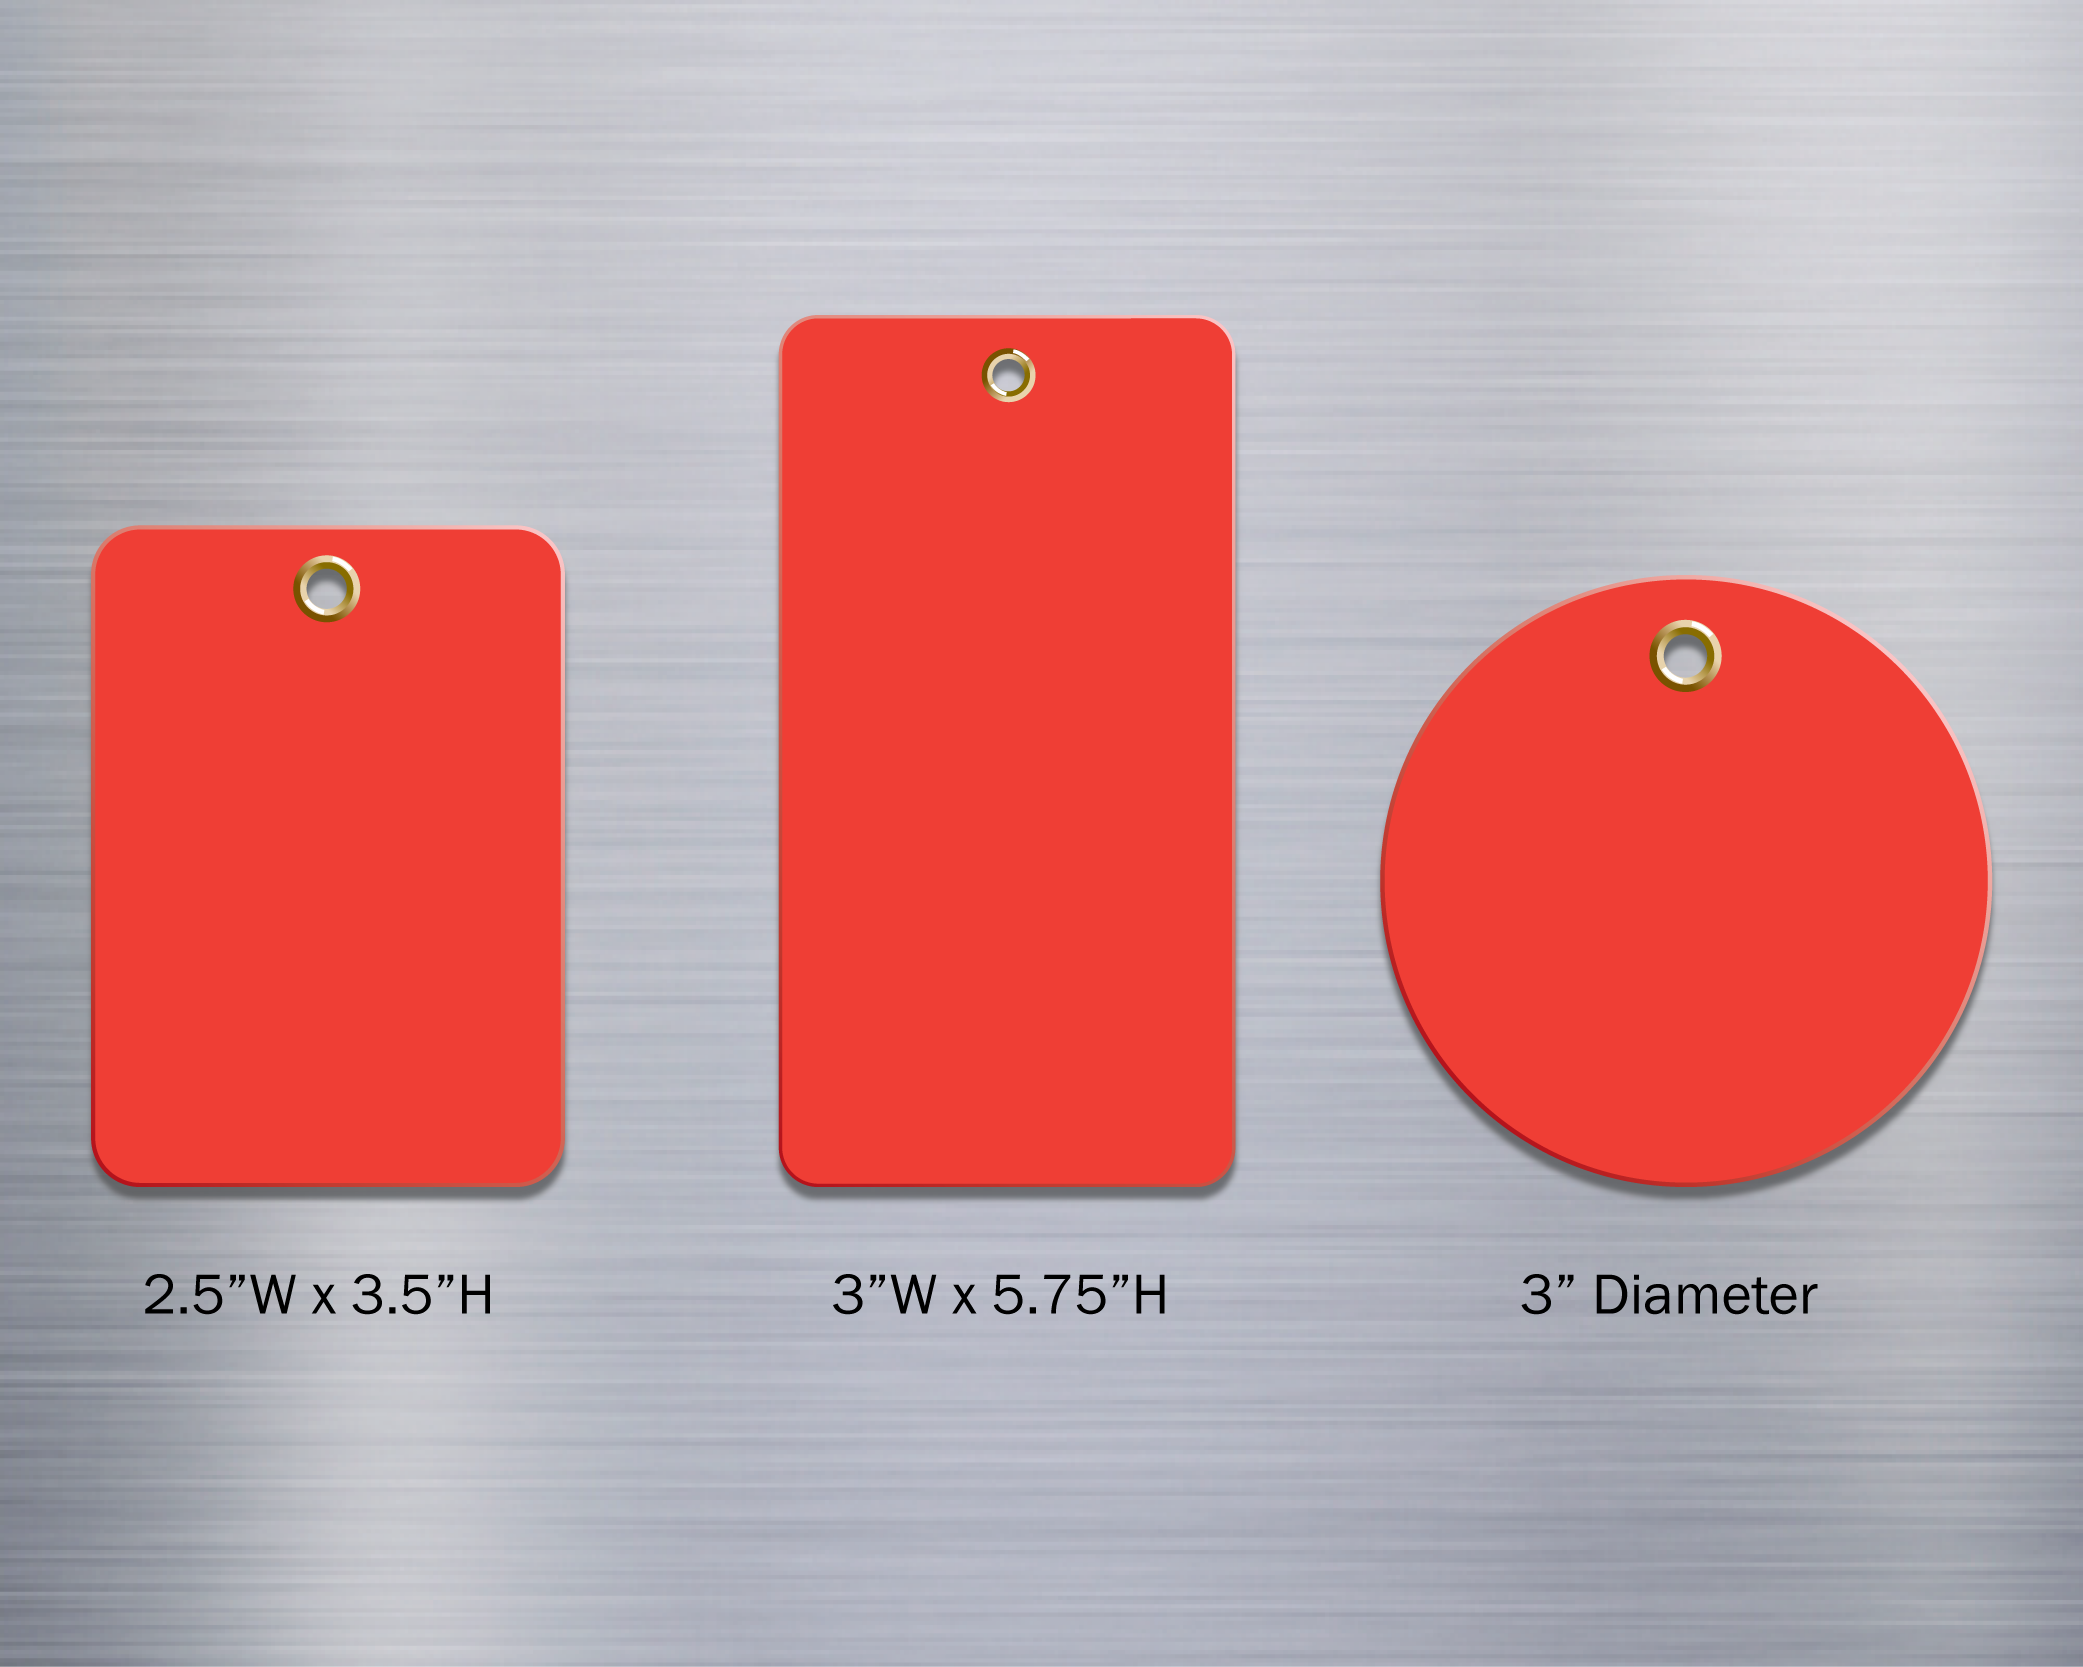 A image of three blank, plastic valve tags in red. Two tags are rectangular with rounded corners and one tag is circular. All three tags have metal eyelets for attachment to valves for valve identification purposes.